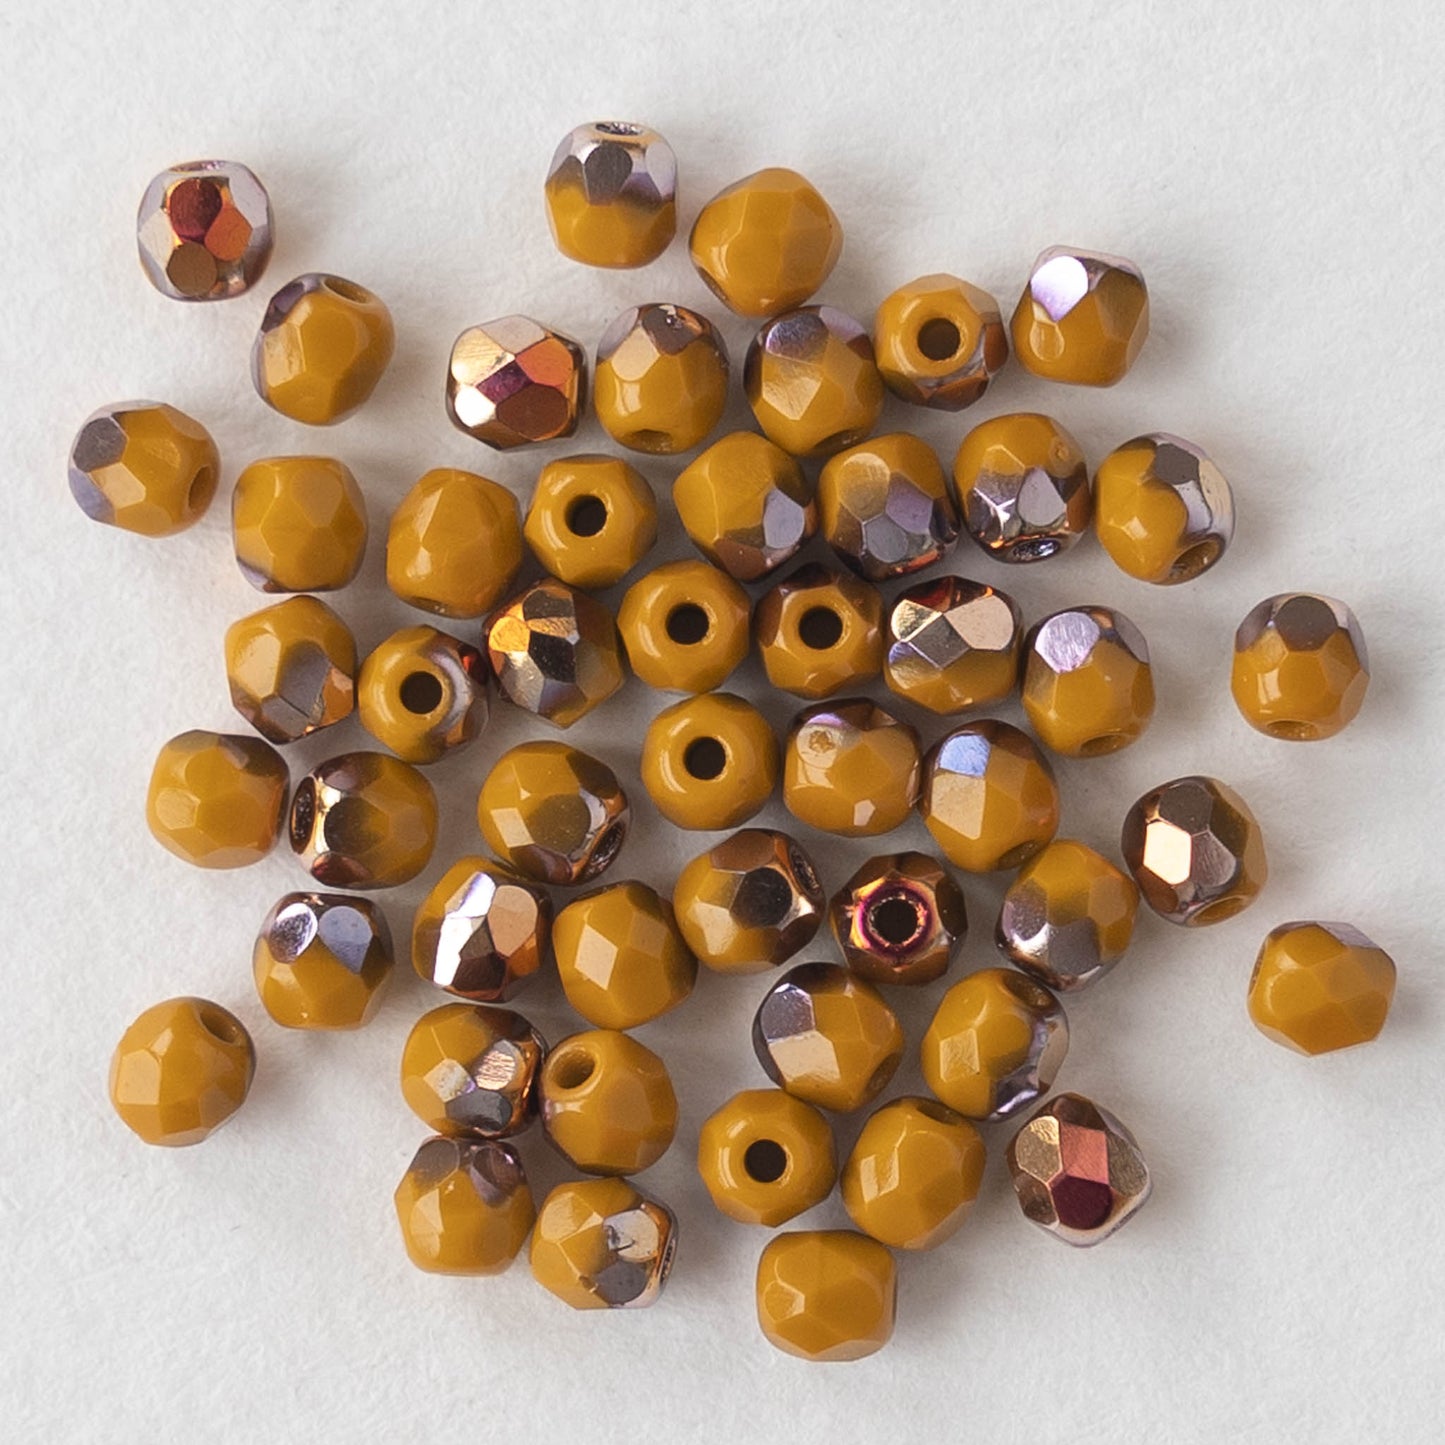 3mm,4mm Round Firepolished Beads - Opaque Golden Amber with Marea Half Coat - 50 Beads